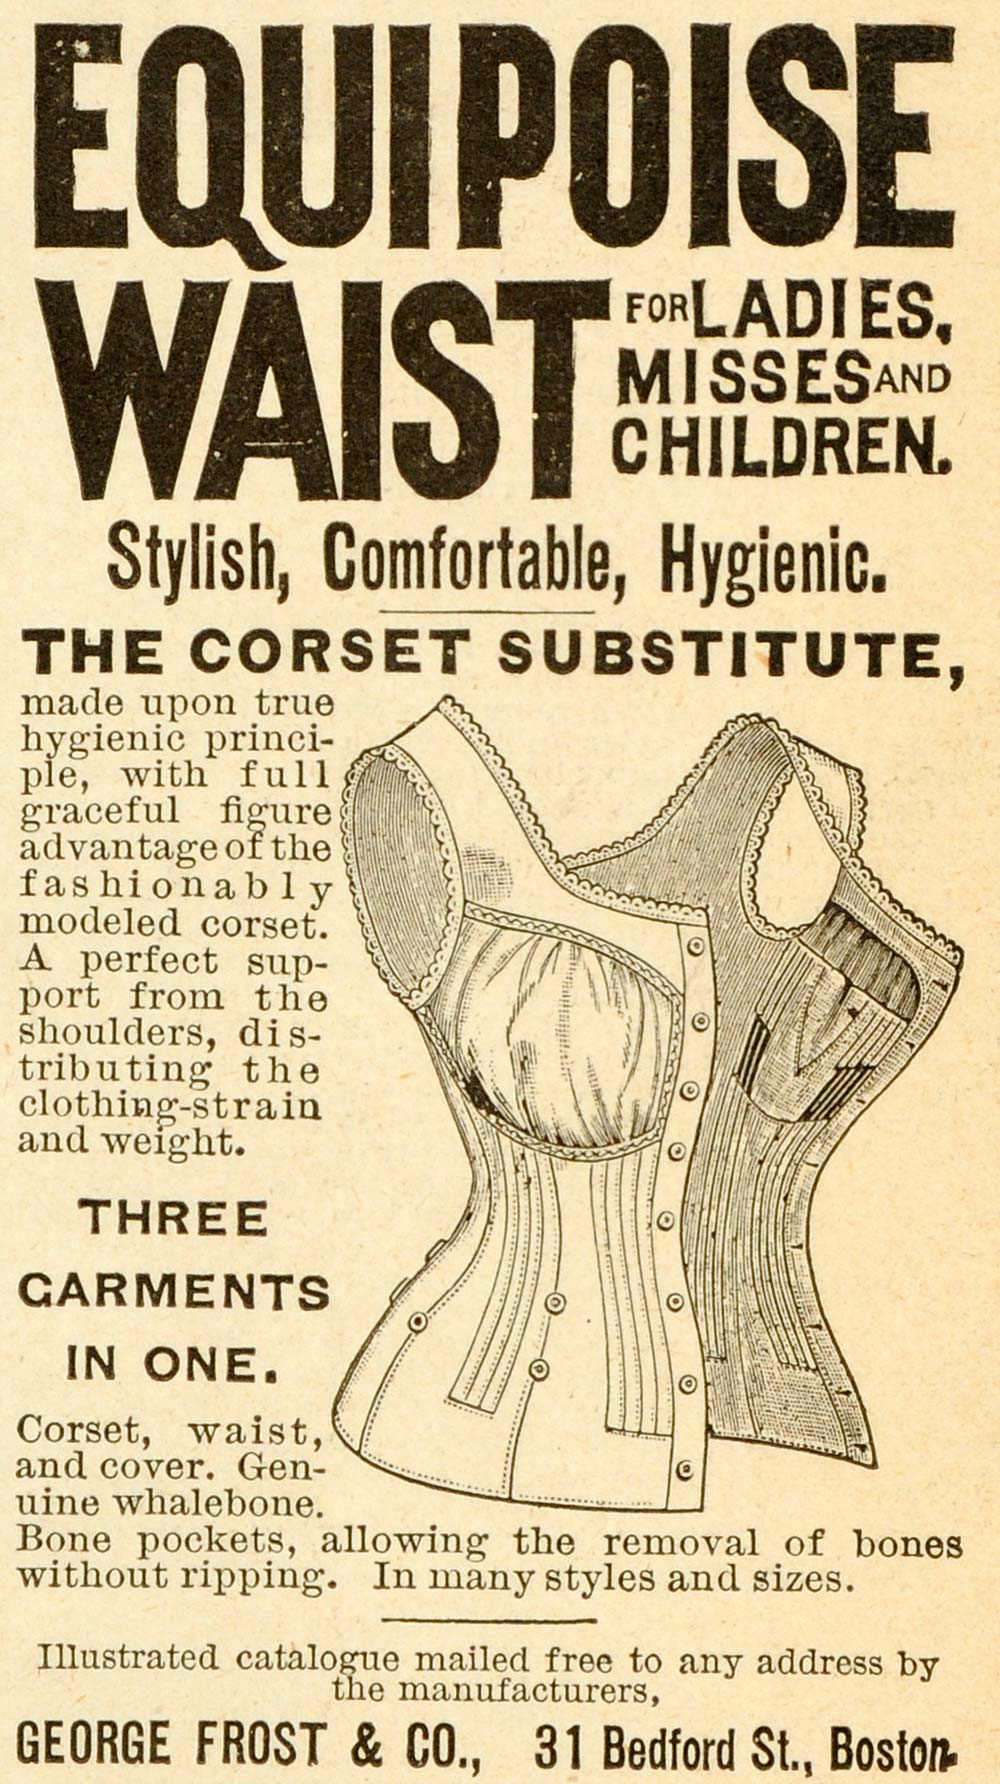 1891 Ad George Frost Equipoise Waist Corset Substitute Clothing Accessories LHJ6